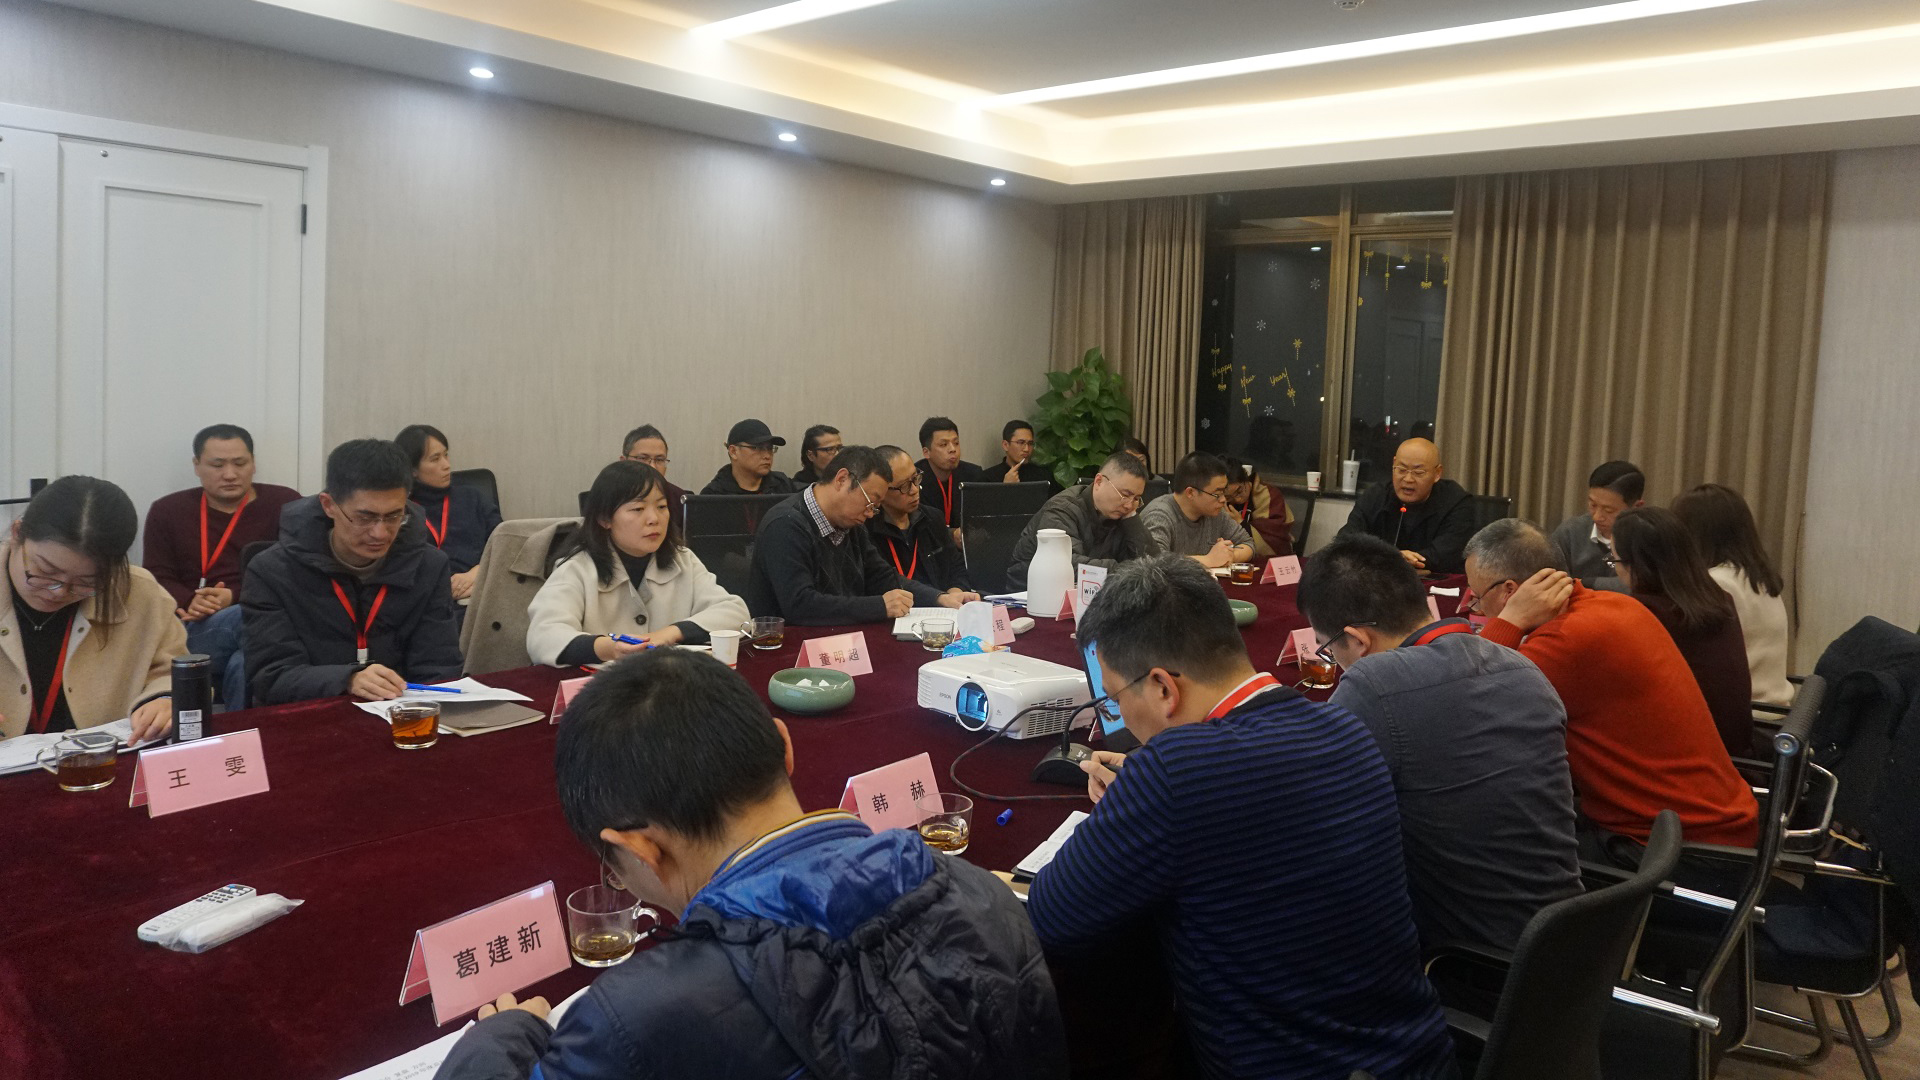 Integration Review Direction | Chengbang Design Group 2019 Annual Work Summary Meeting Was Successfully Concluded